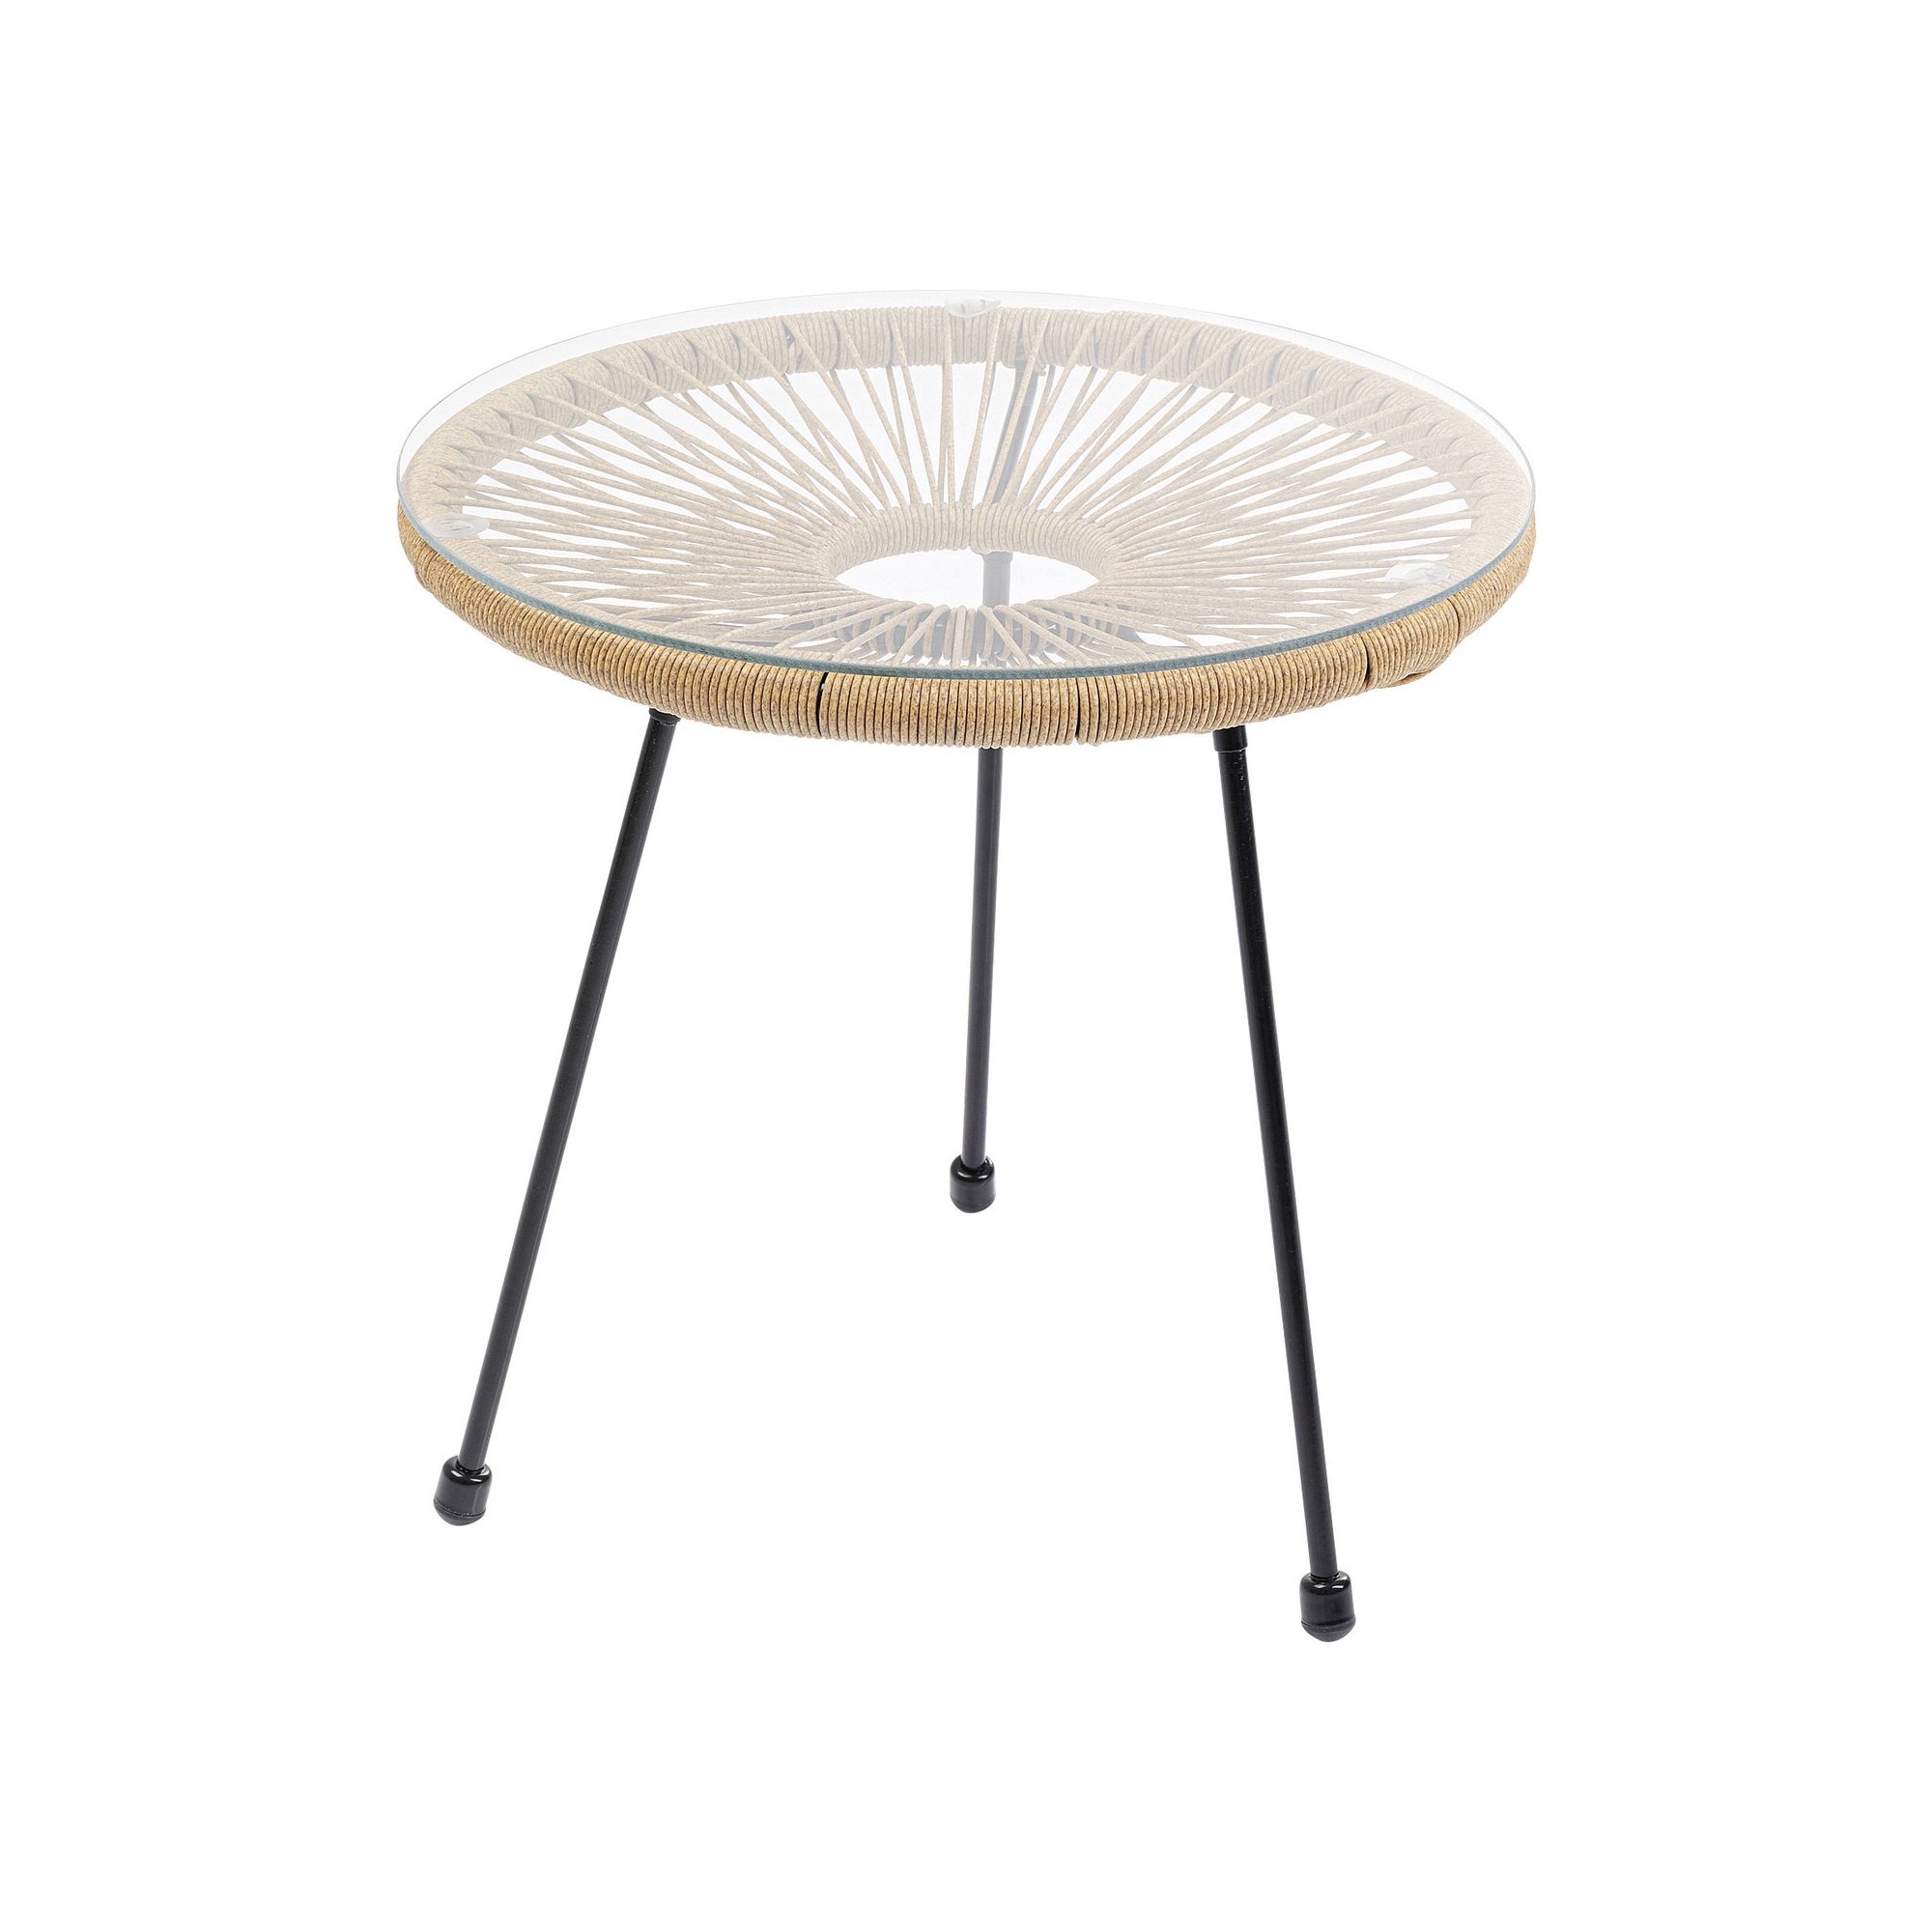 Table d'appoint Acapulco nature Kare Design